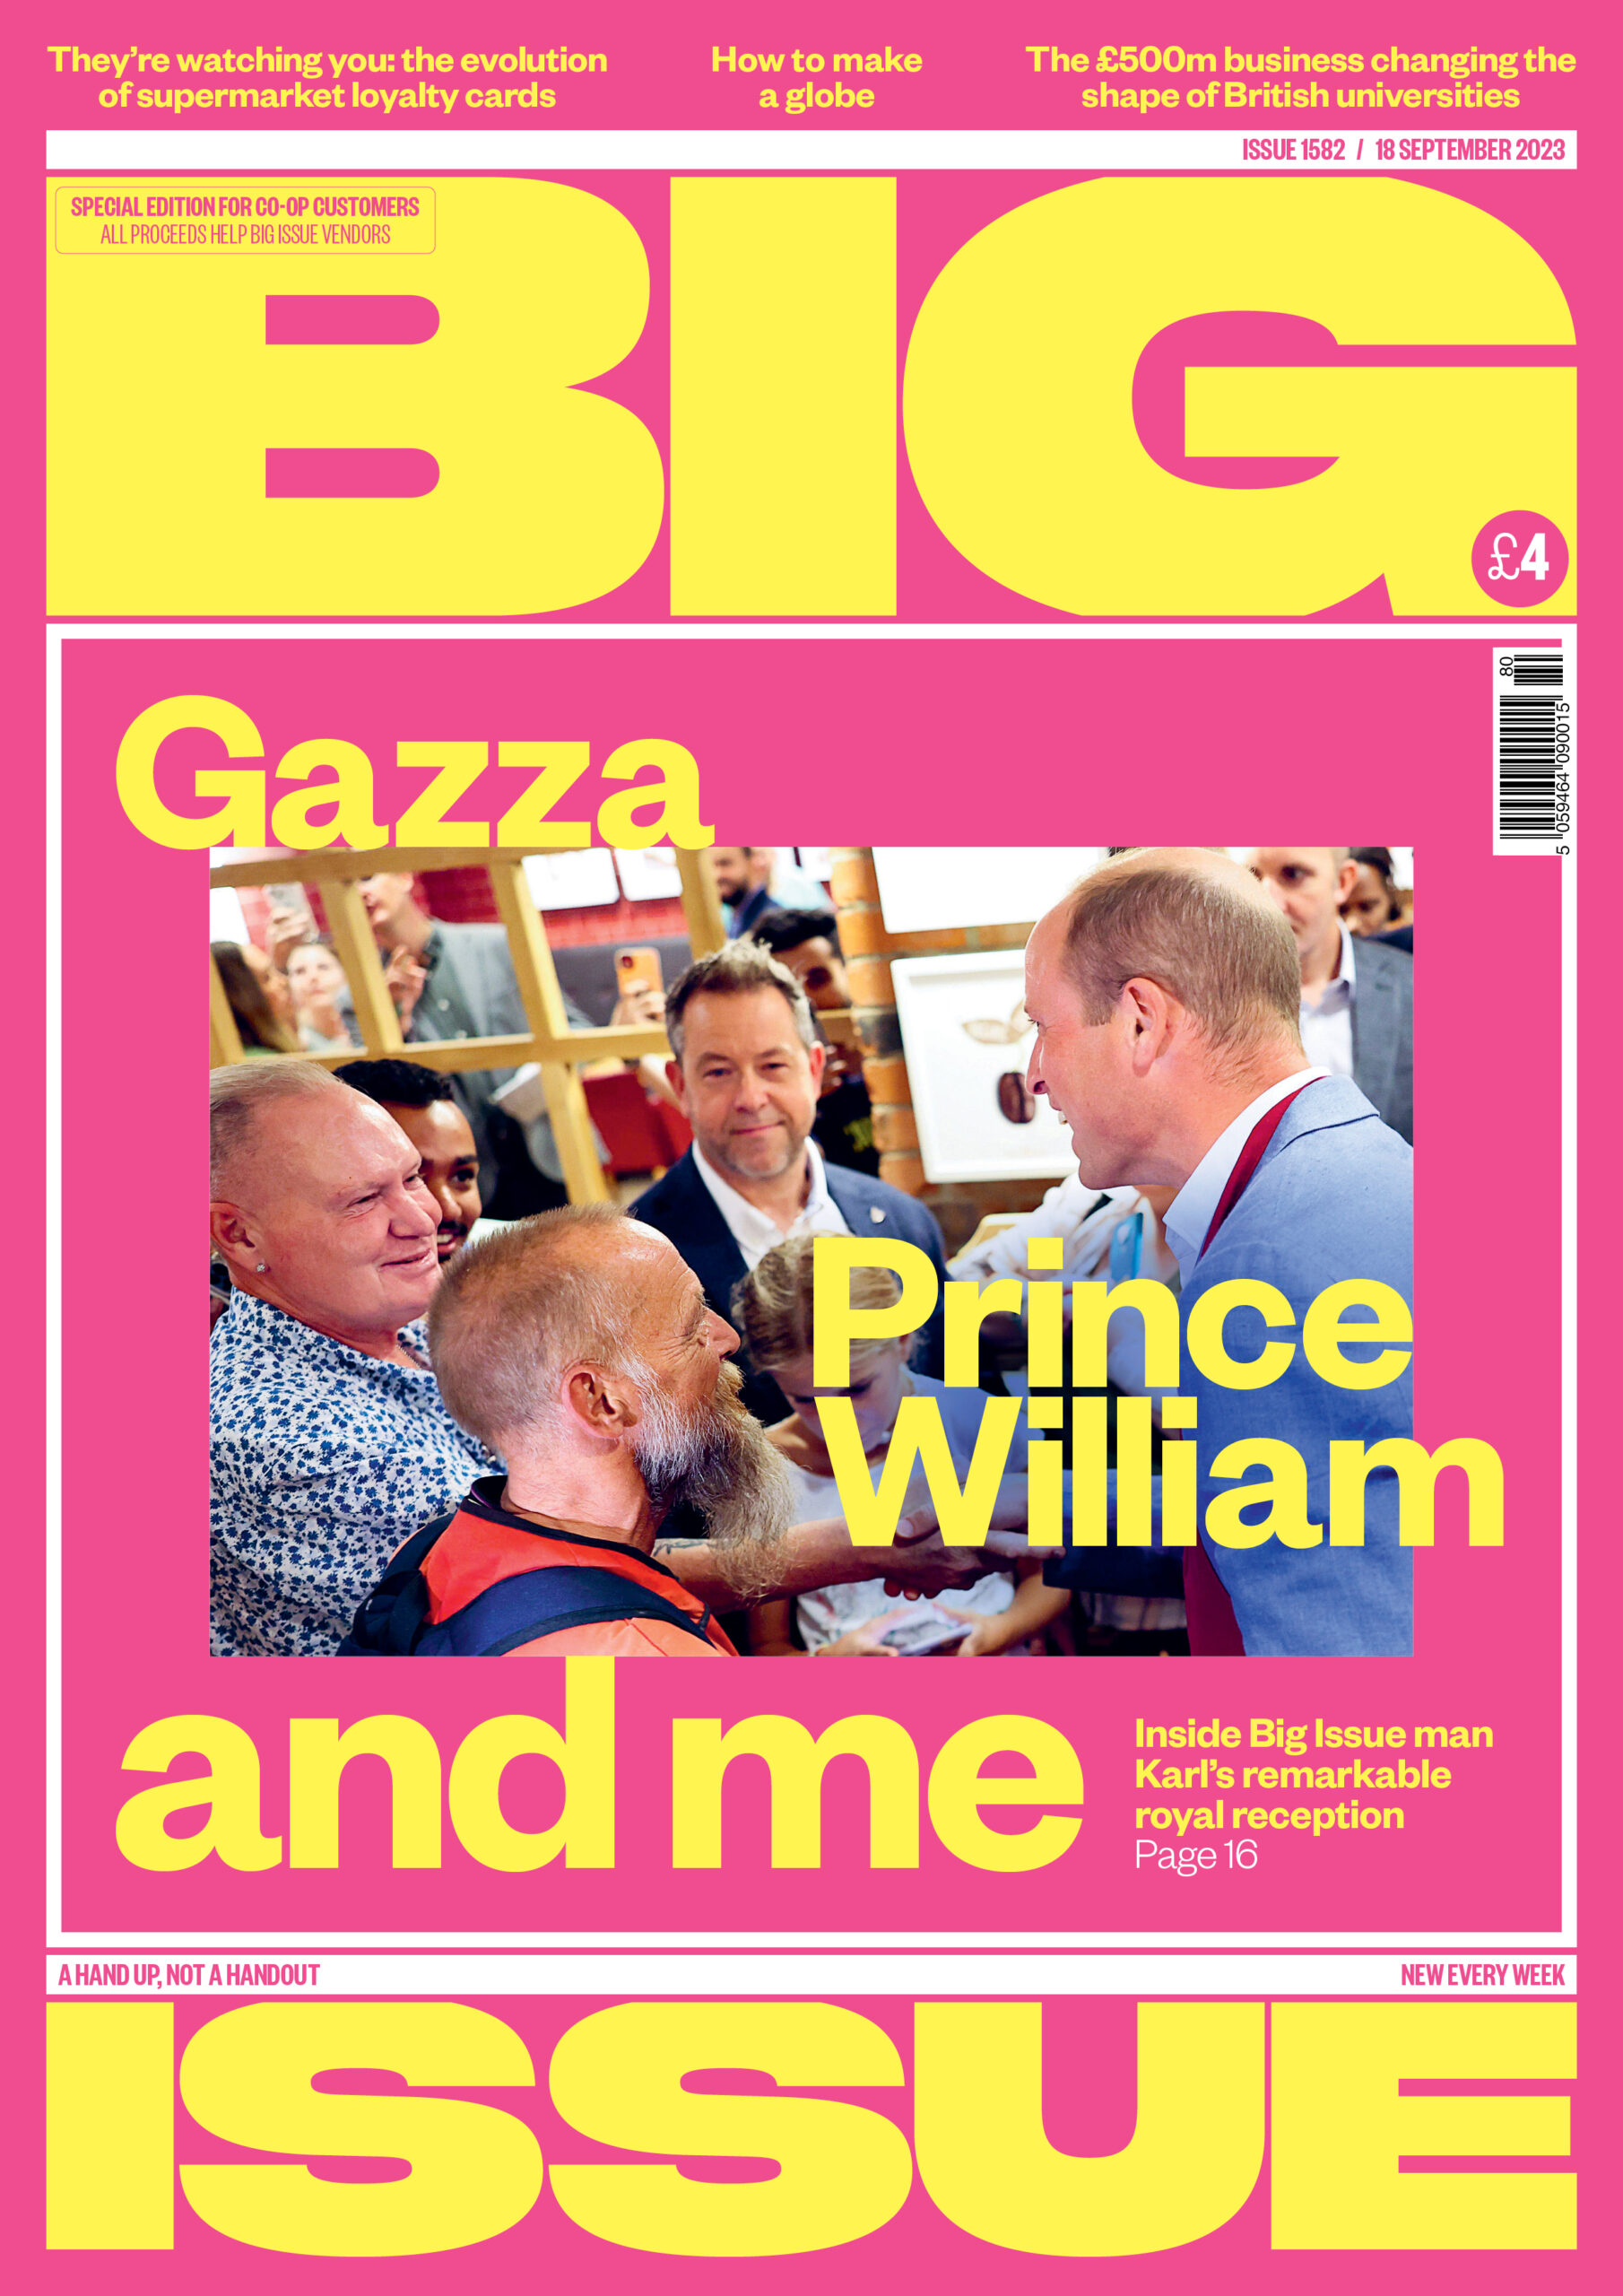 Big Issue magazine cover issue 1582 with Prince William on the cover